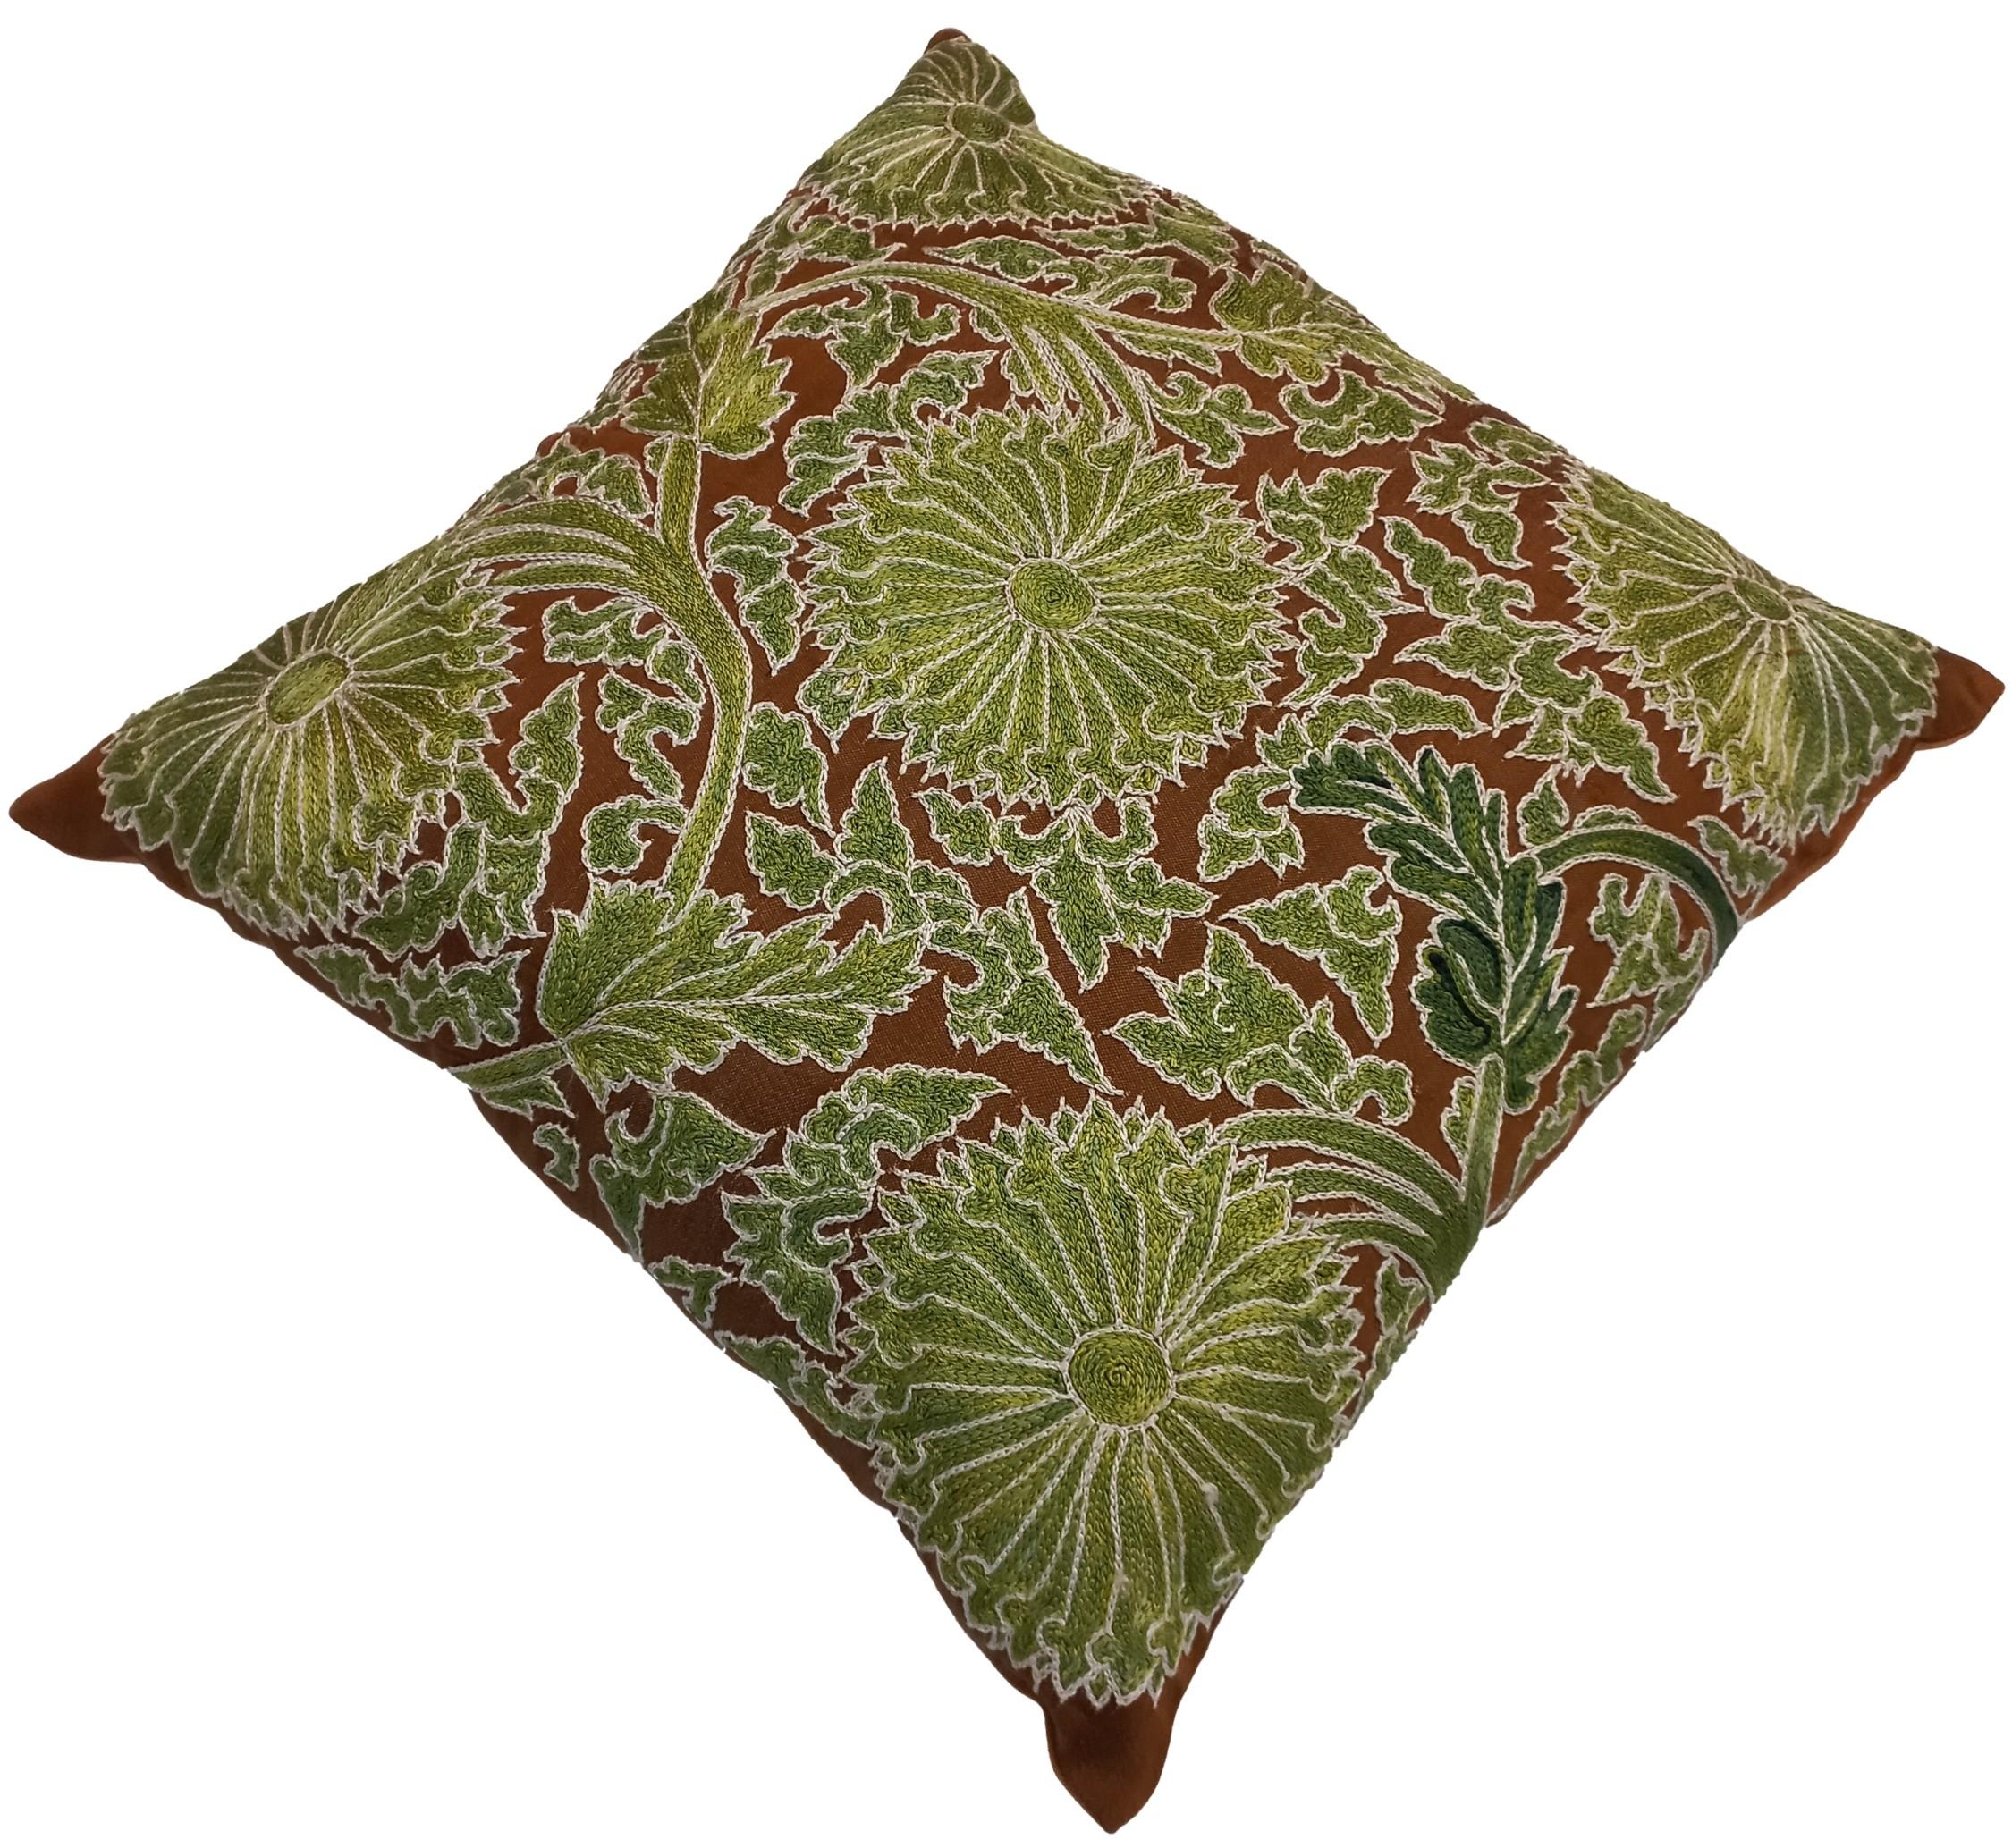 Introducing our new suzani hand embroidered silk cushion cover, a perfect addition to your home decor collection. Made from 100% silk, this throw pillow cover exudes elegance and style. The intricate embroidery work adds a touch of splendor to any